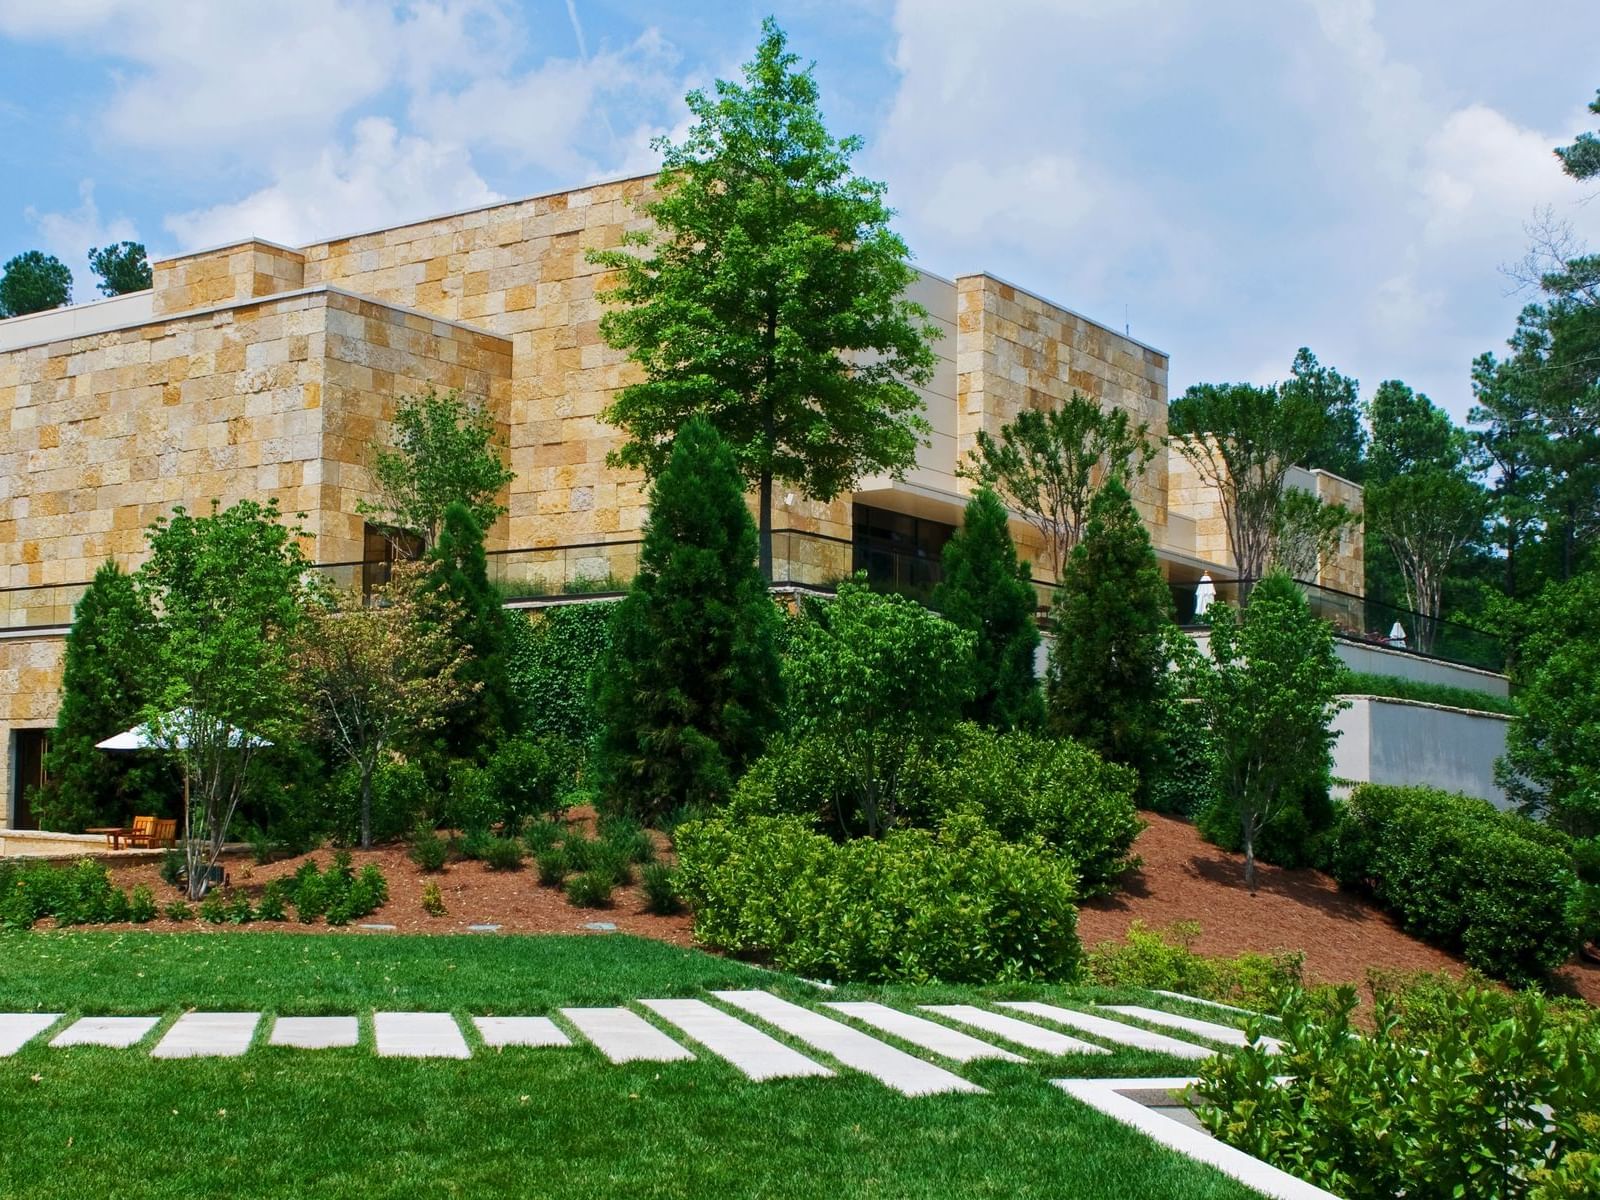 Hotel exterior surrounded by lush greenery at The Umstead Hotel and Spa